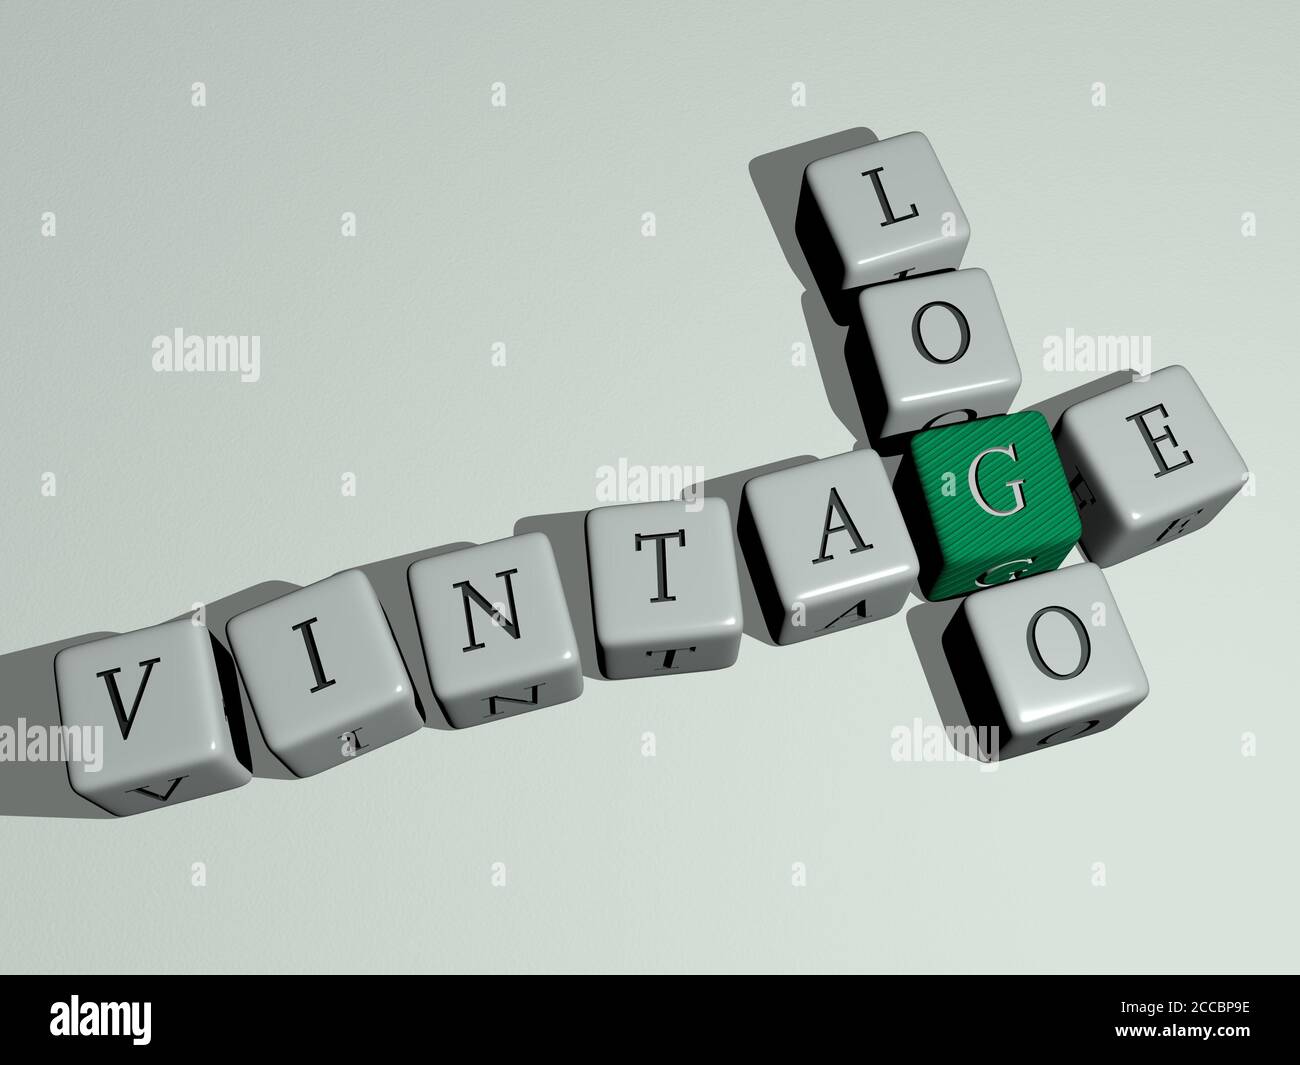 vintage logo crossword by cubic dice letters, 3D illustration Stock Photo